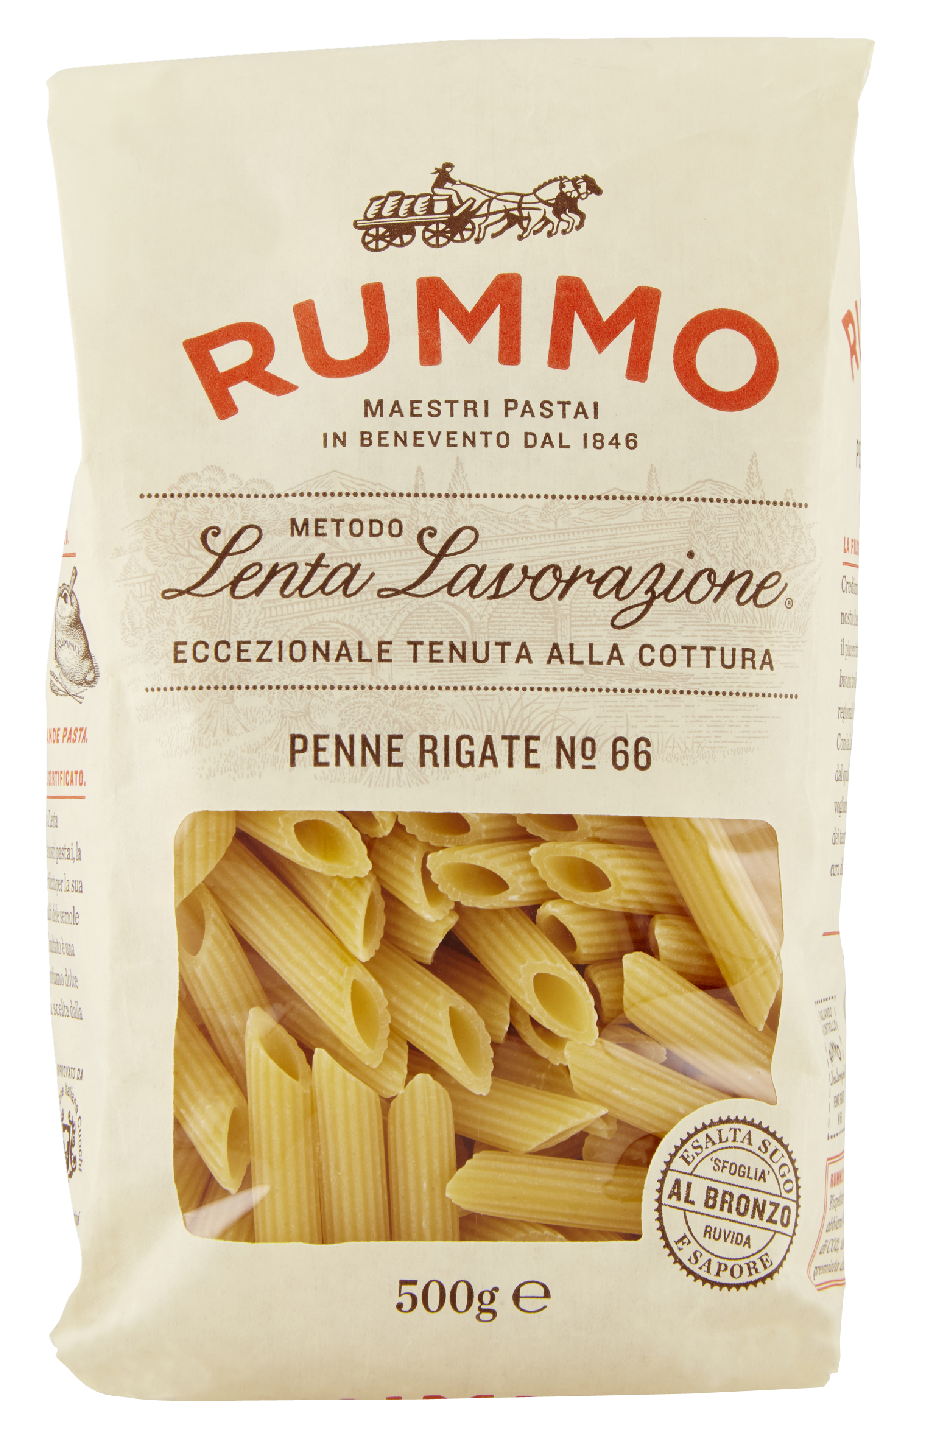 Rummo penne rigate No 66 500g